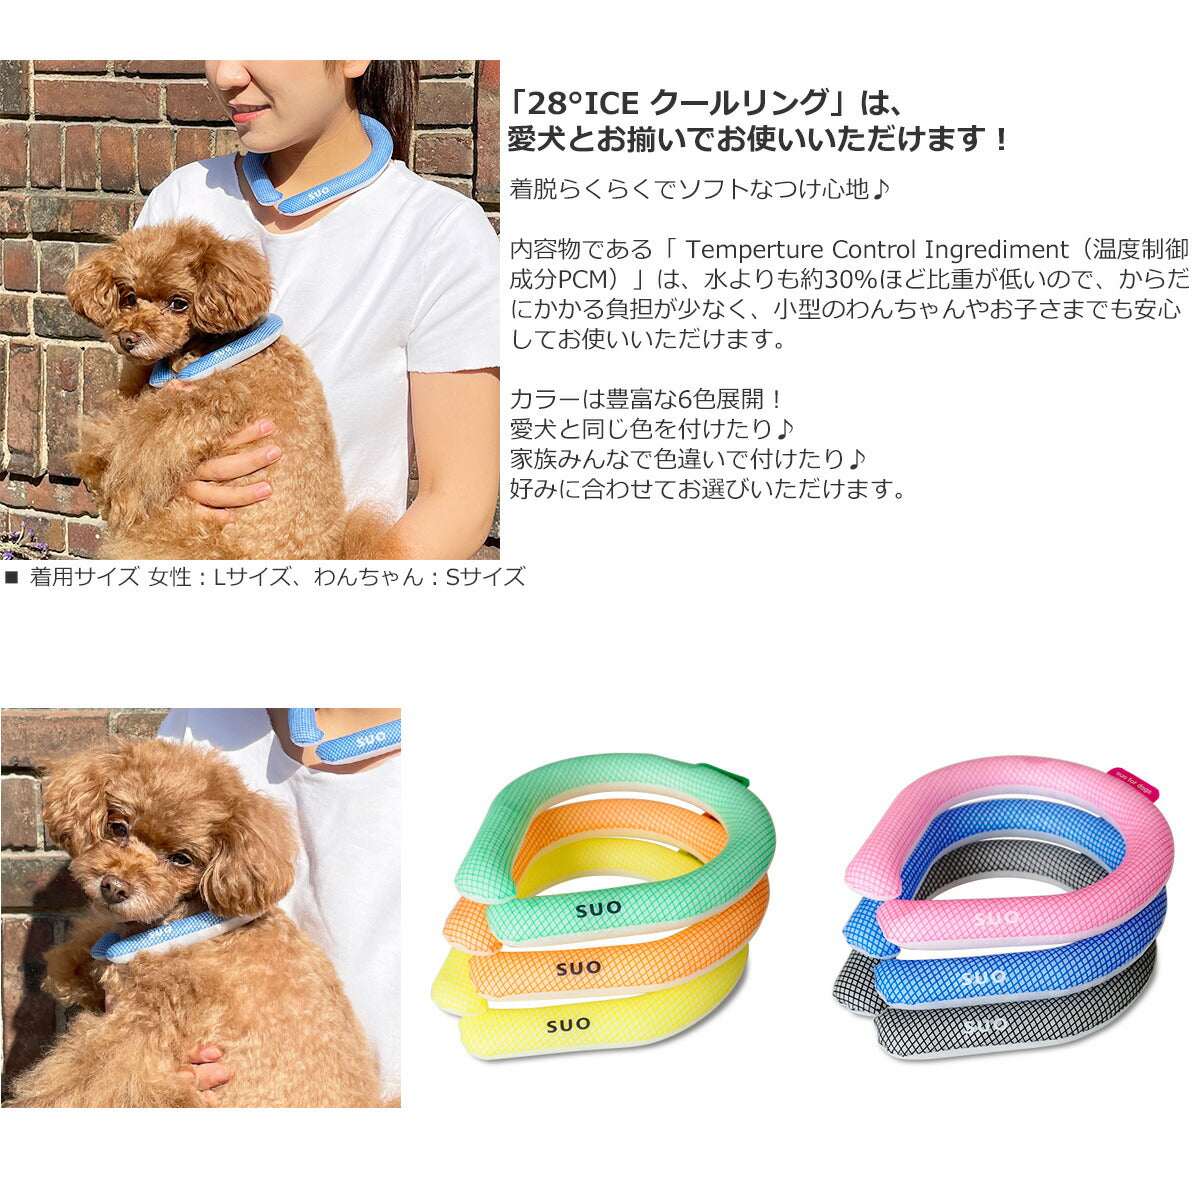 SUO for dogs 28°ICE SUOリング ボタンなし M ブラック 熱中症対策グッズ 暑さ対策 ひんやり 首 冷感 犬 大人 子供